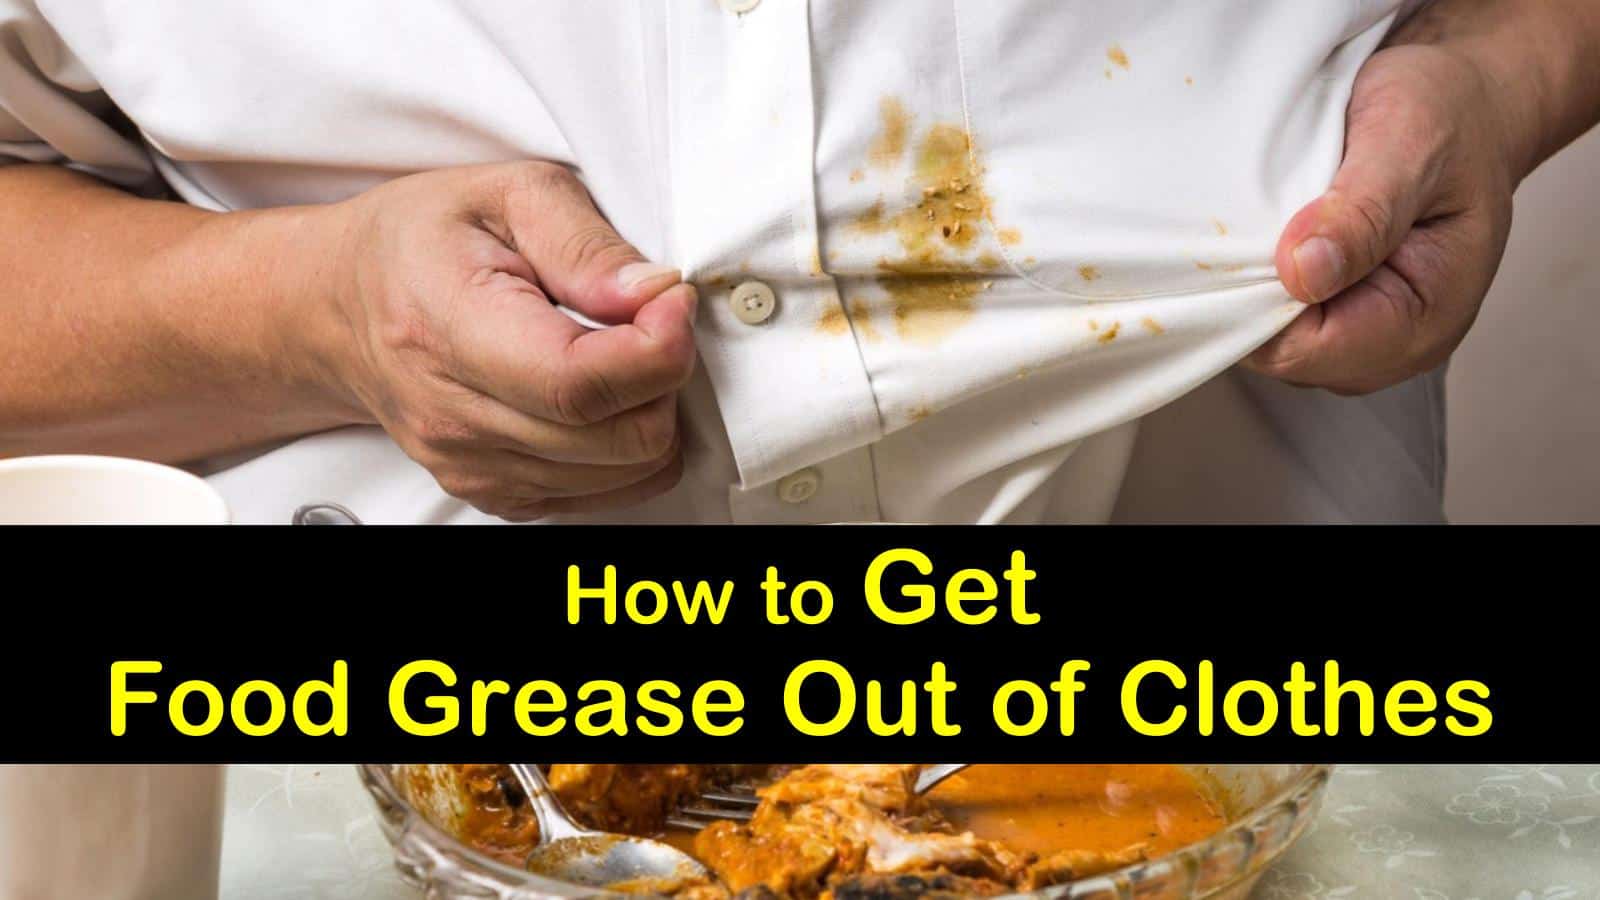 how to get food grease out of clothes titleimg1